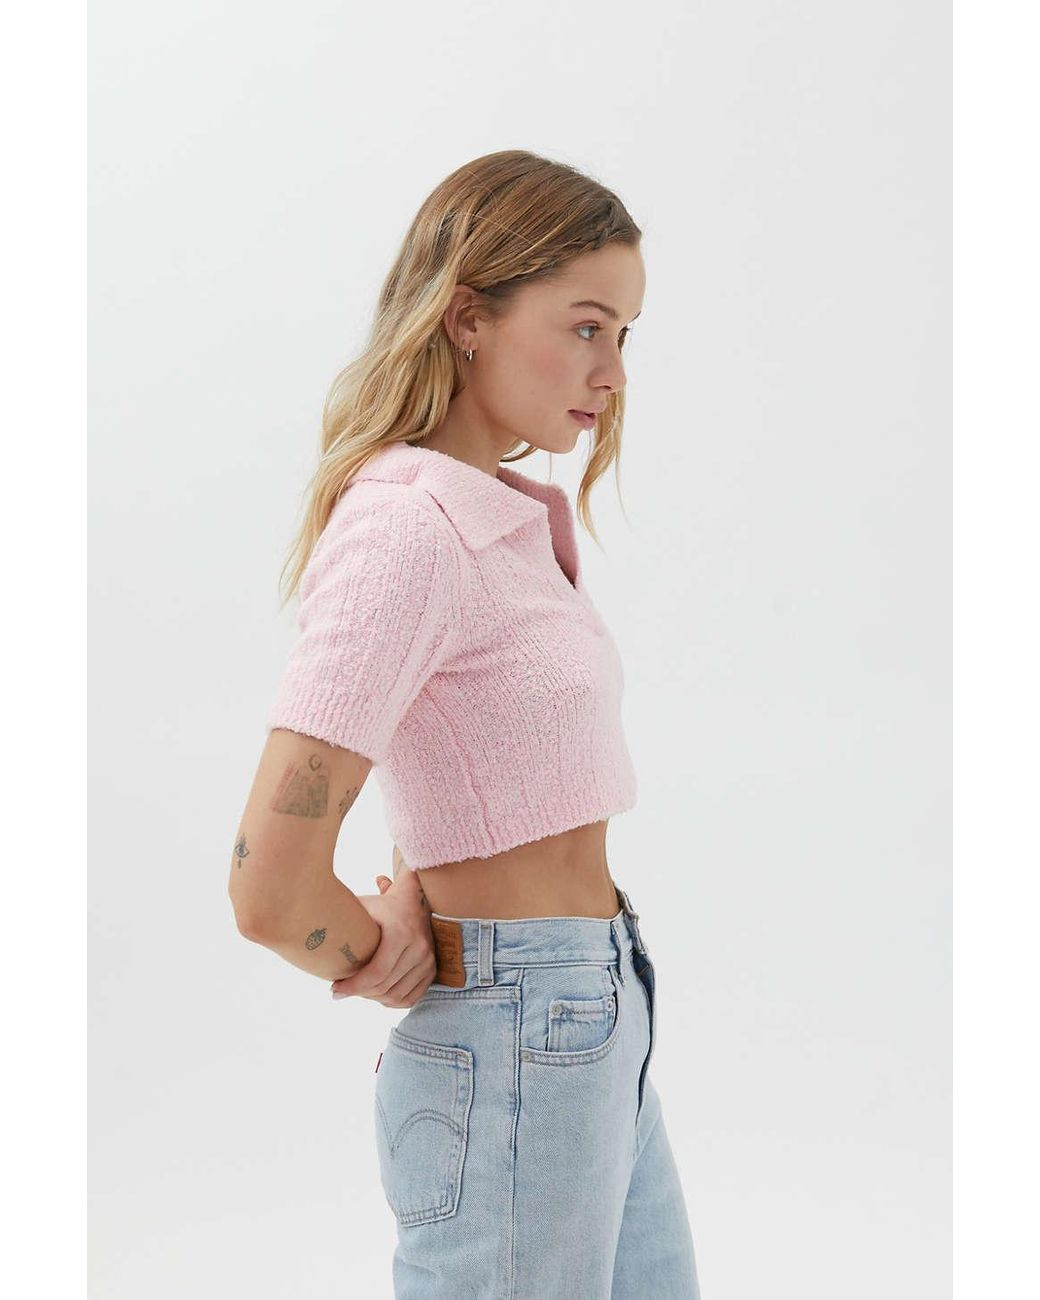 Urban Outfitters Uo Andrea Collared Cropped Sweater in Pink | Lyst